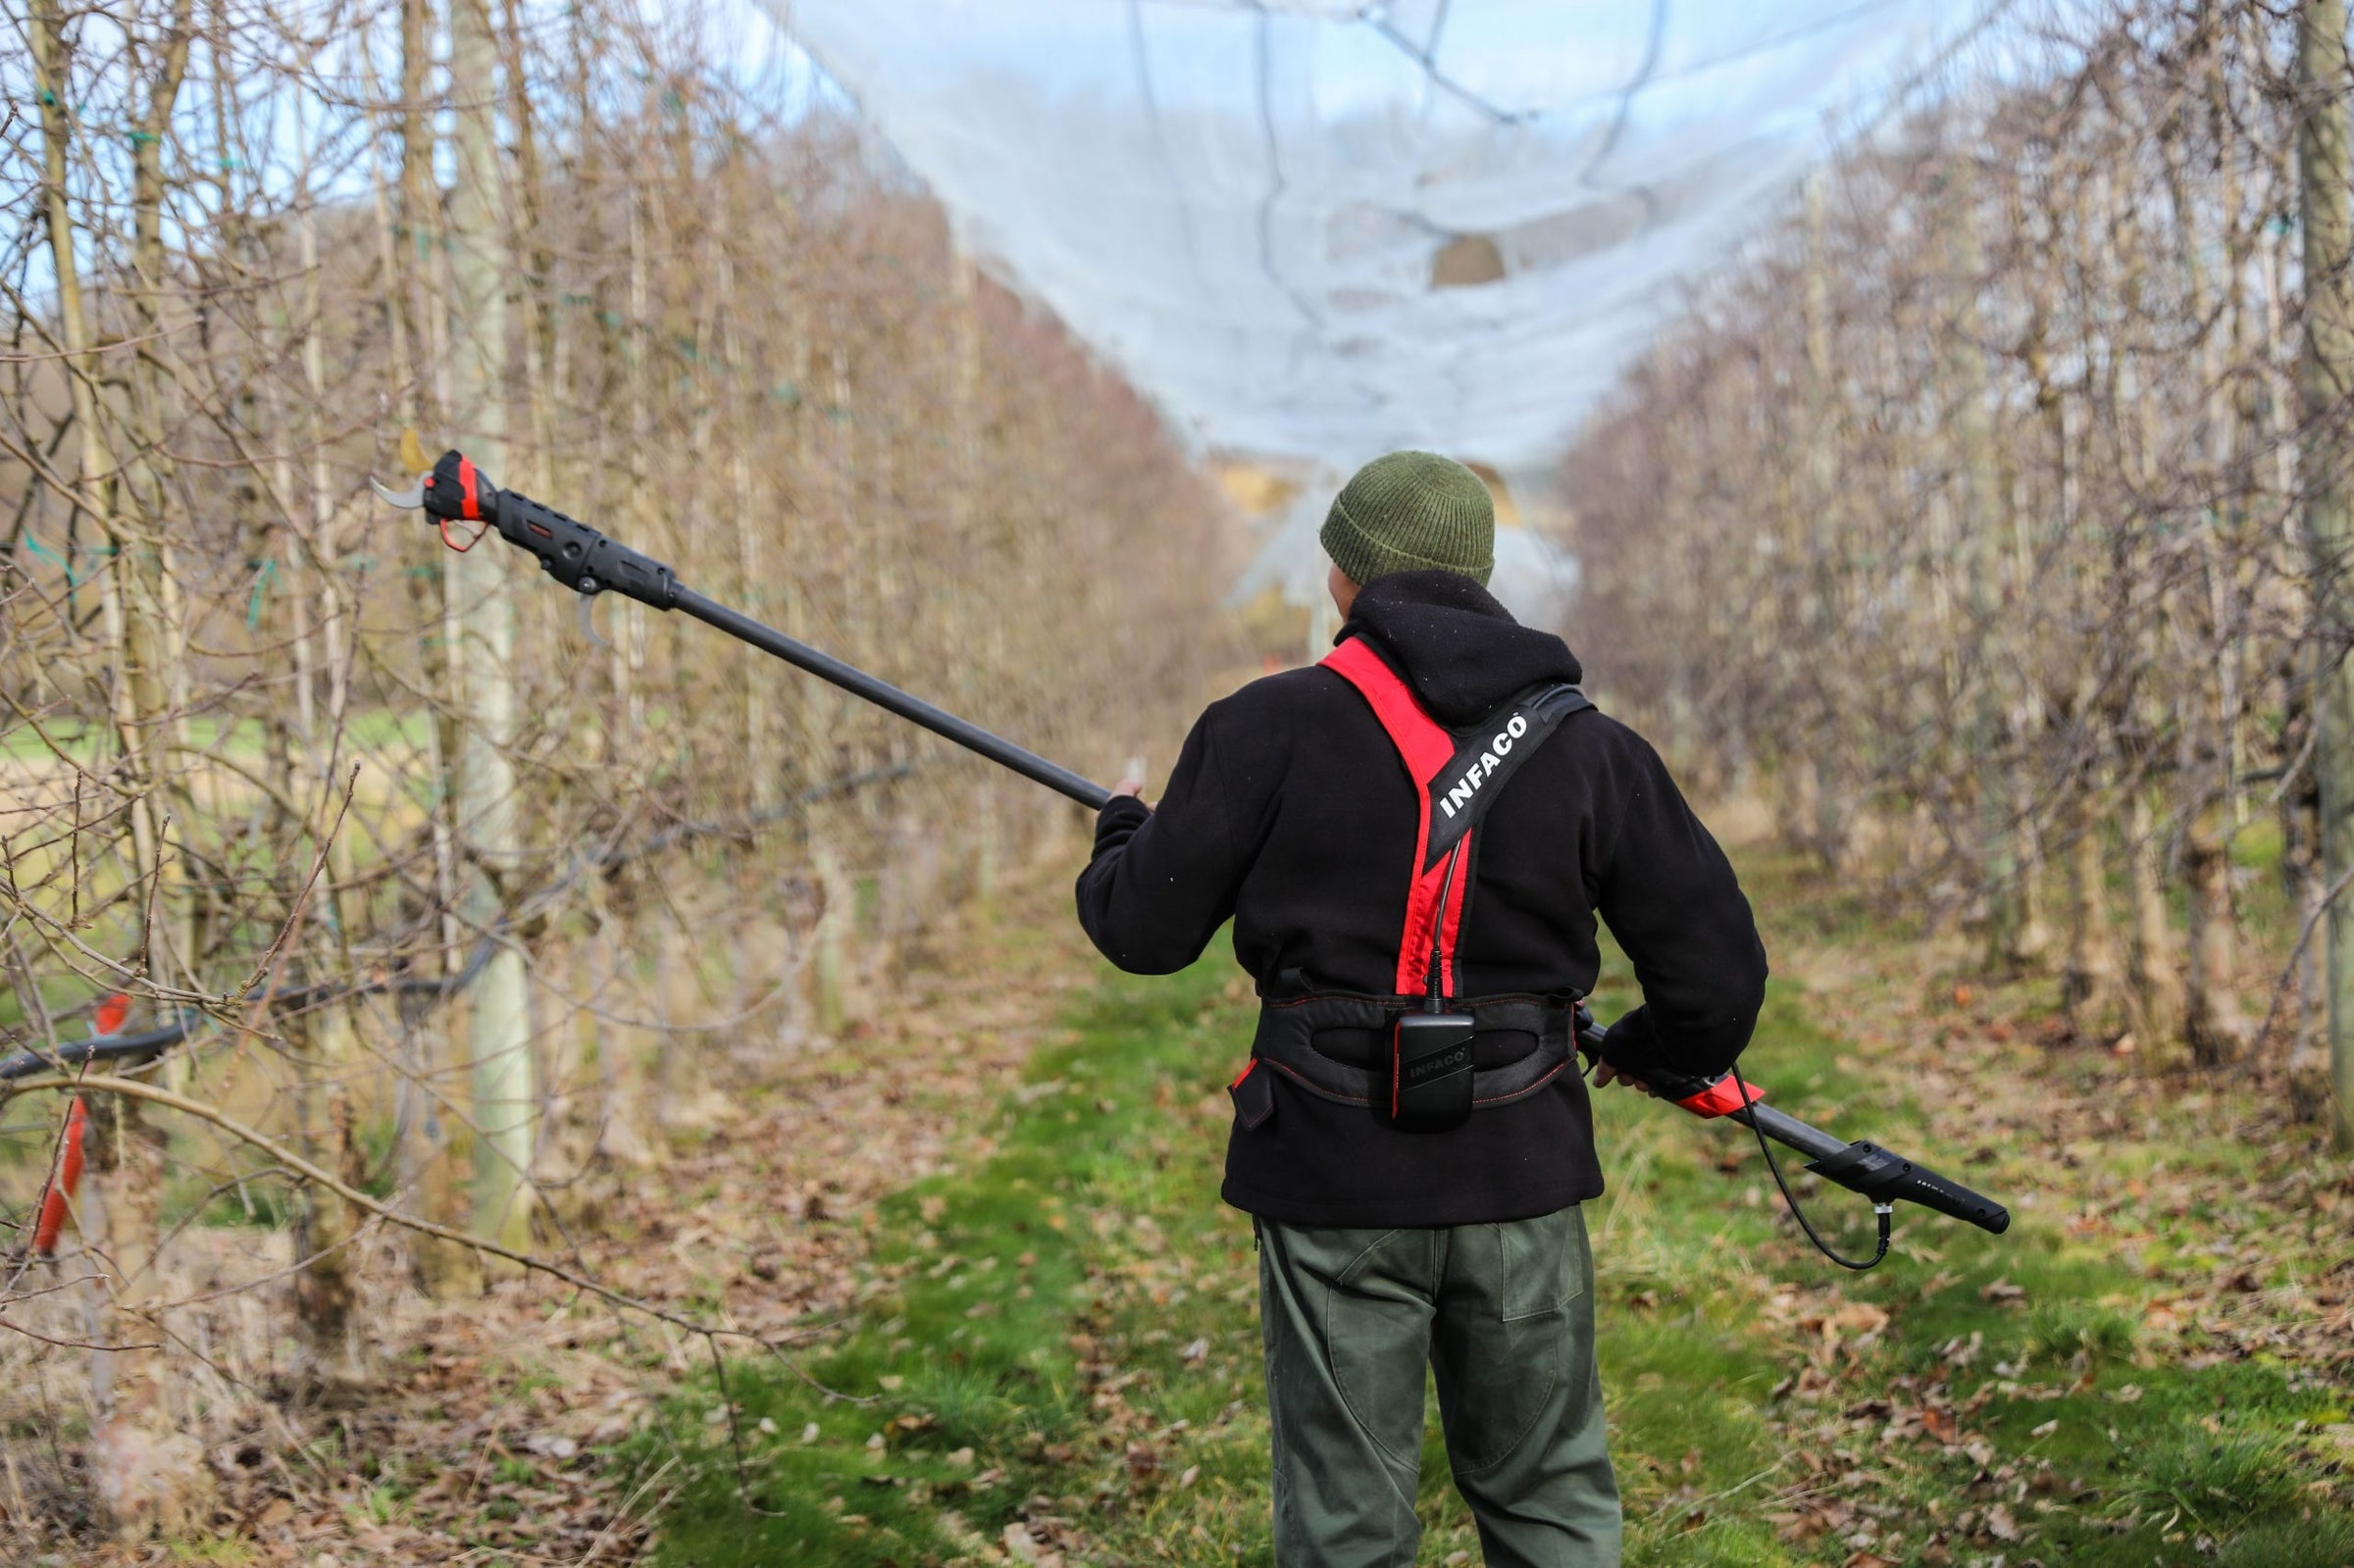 Fruit tree and orchard management tools